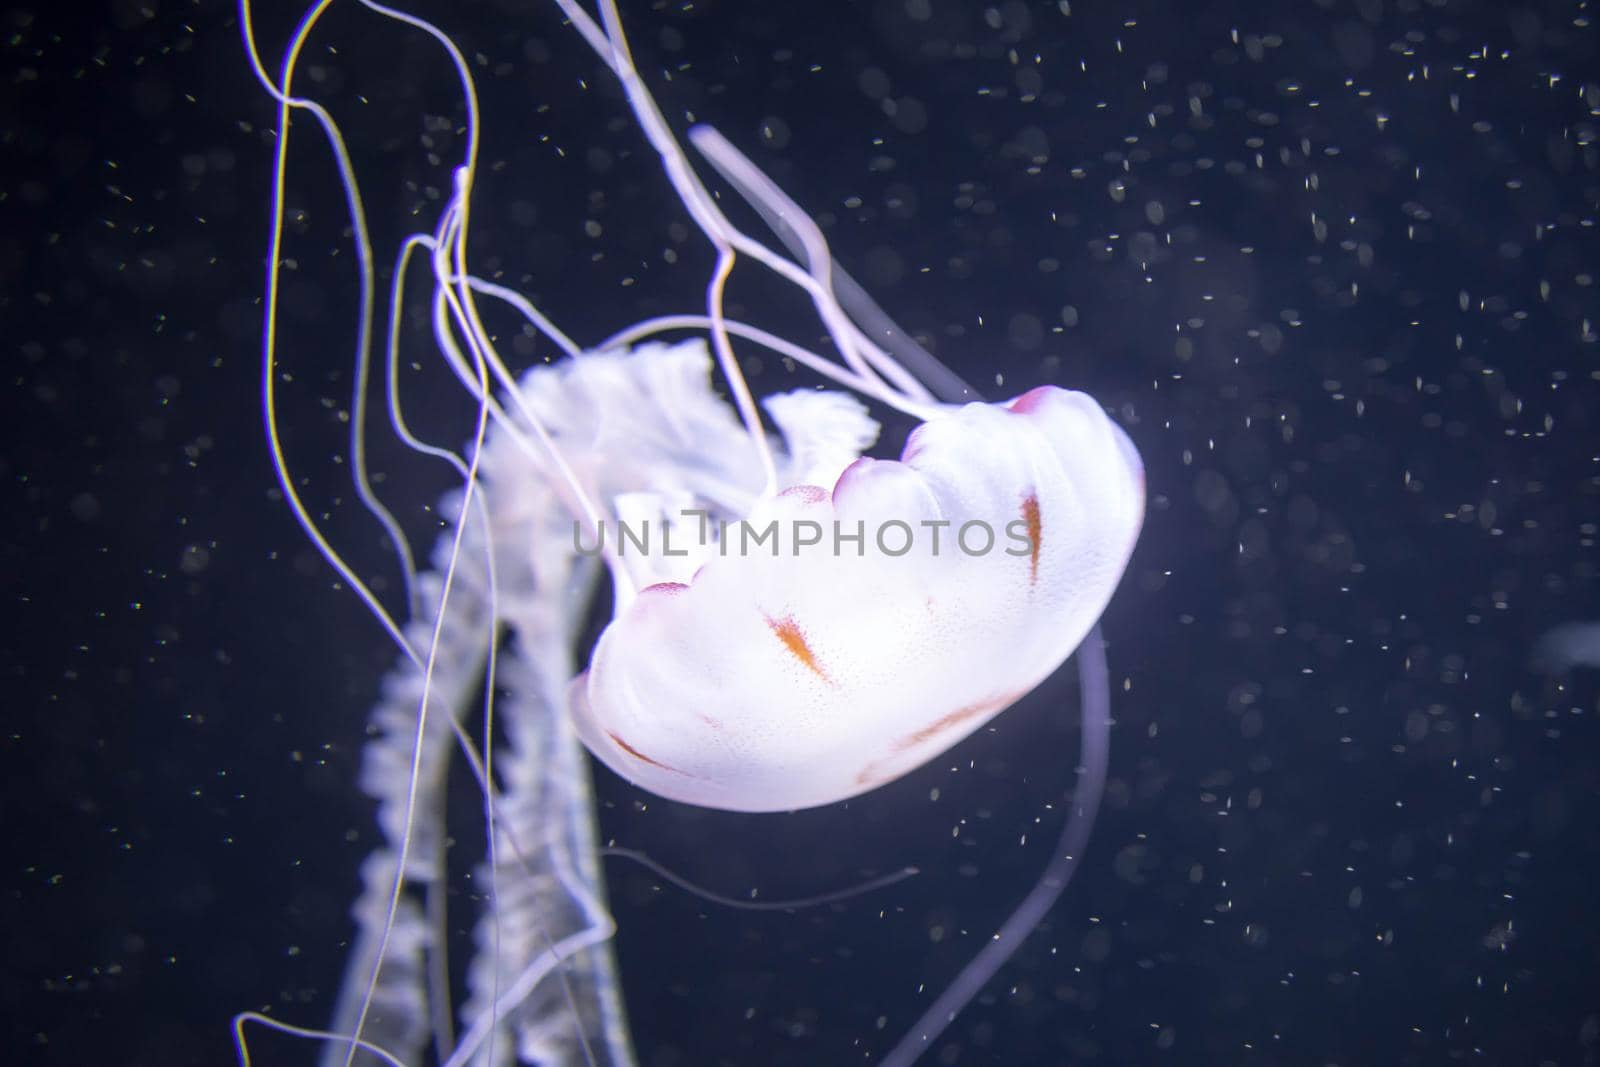 Blurry white colored jelly fishes floating on waters with long tentacles. White Pacific sea nettle by billroque